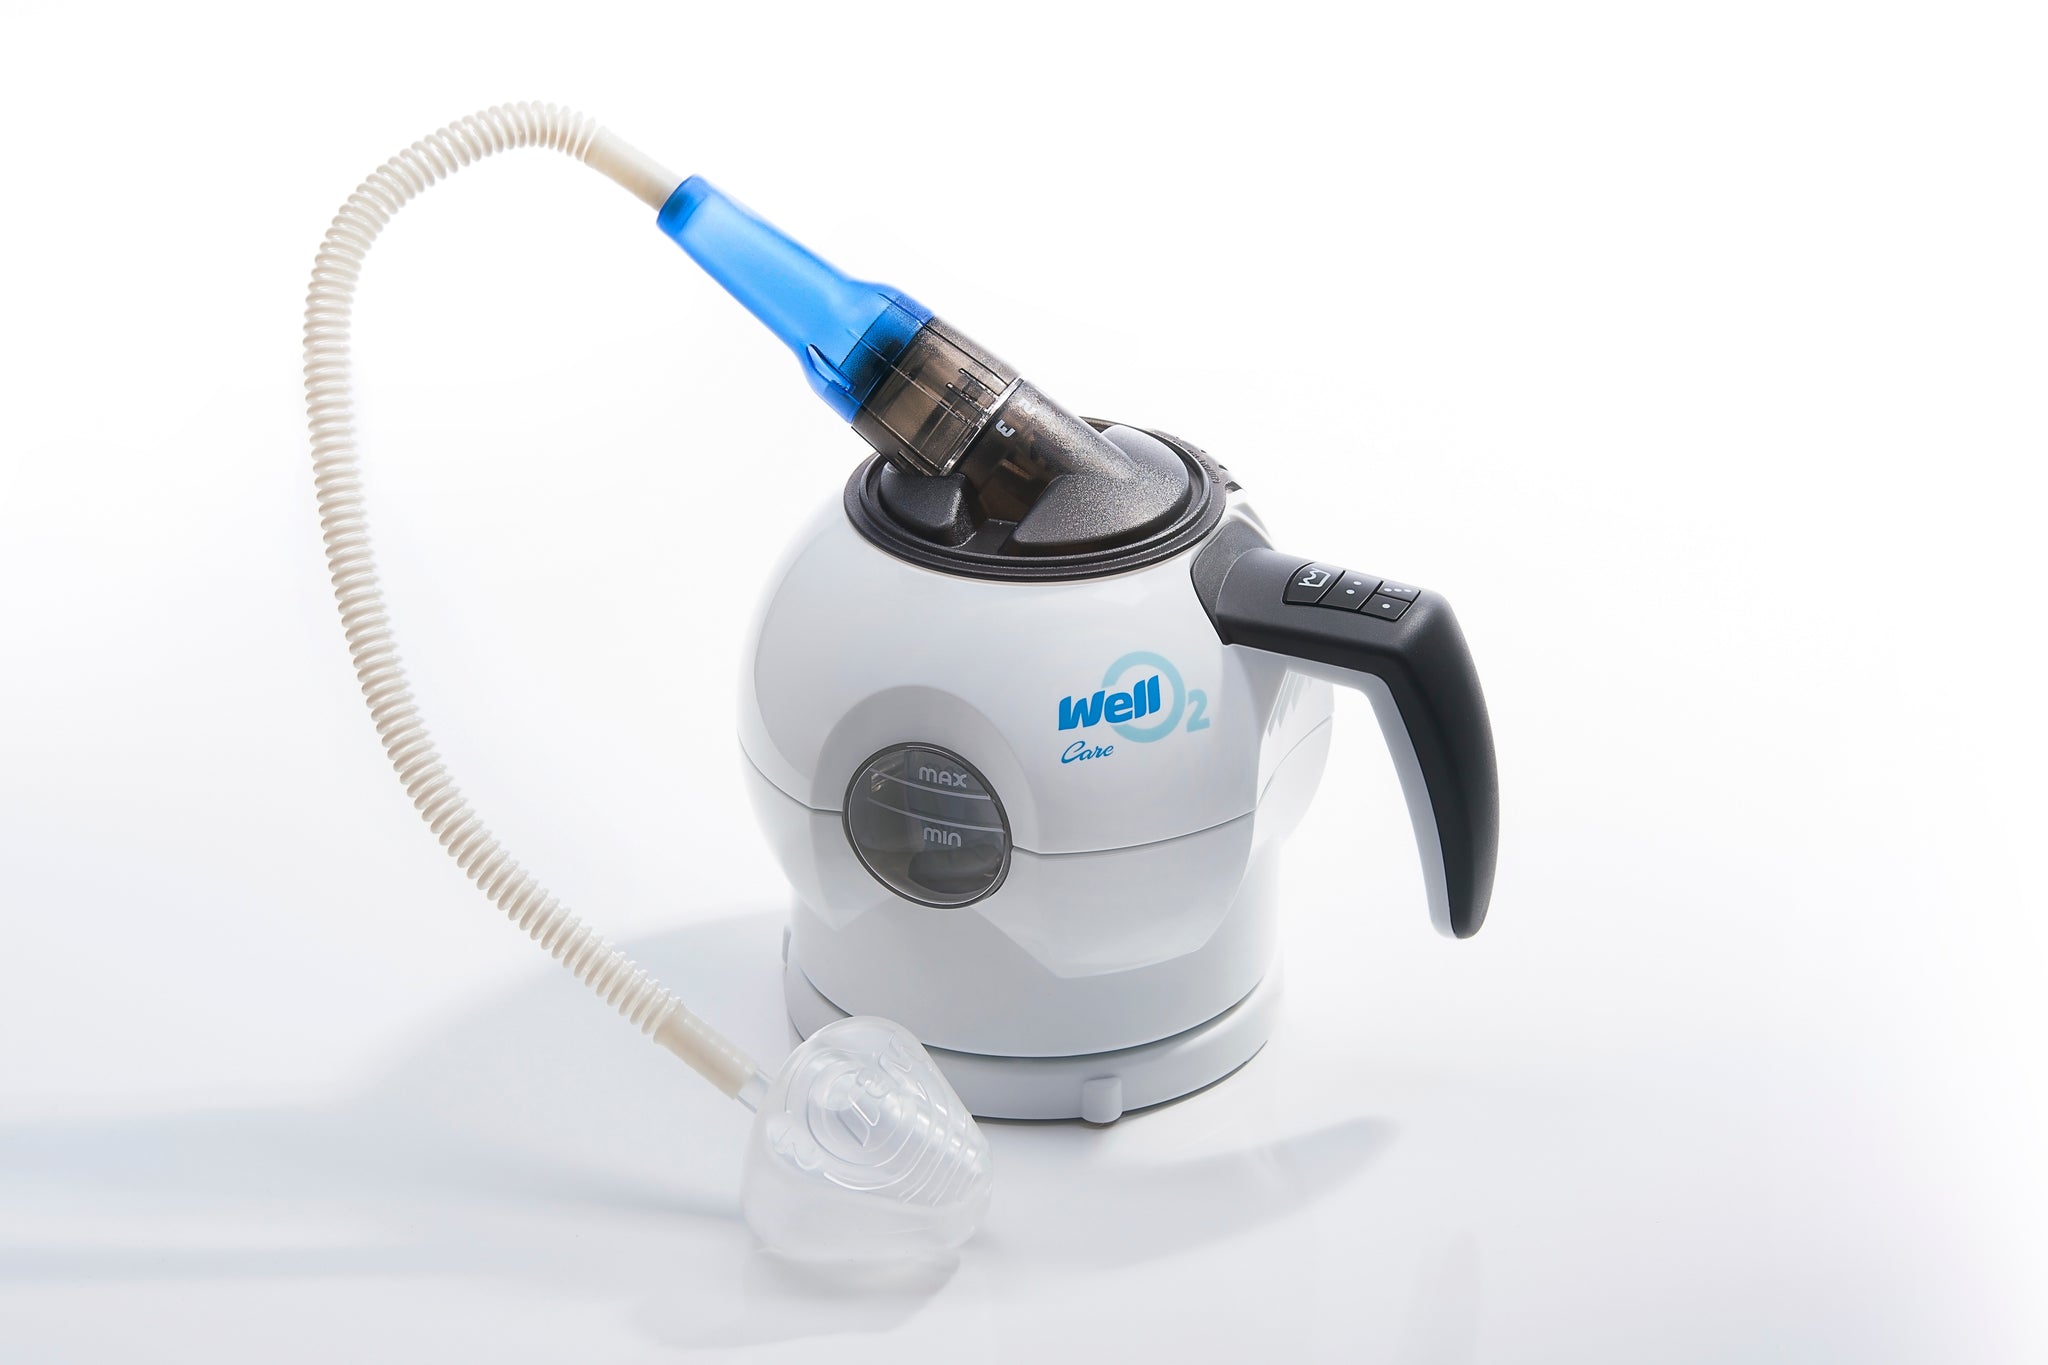 WellO2 device in connection with respiratory infections